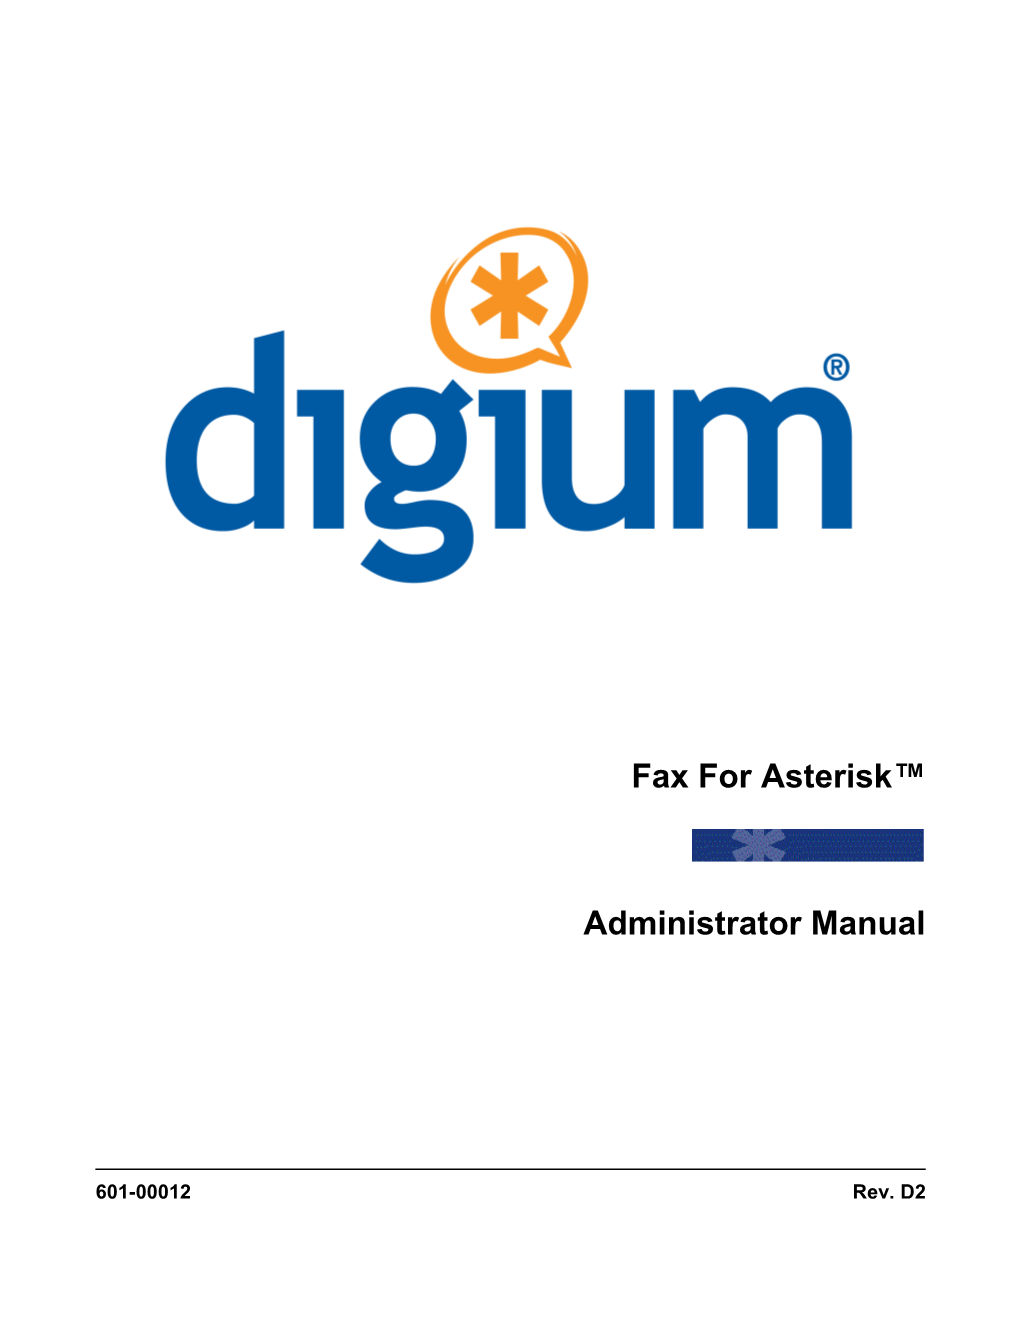 Fax for Asterisk™ Administrator Manual